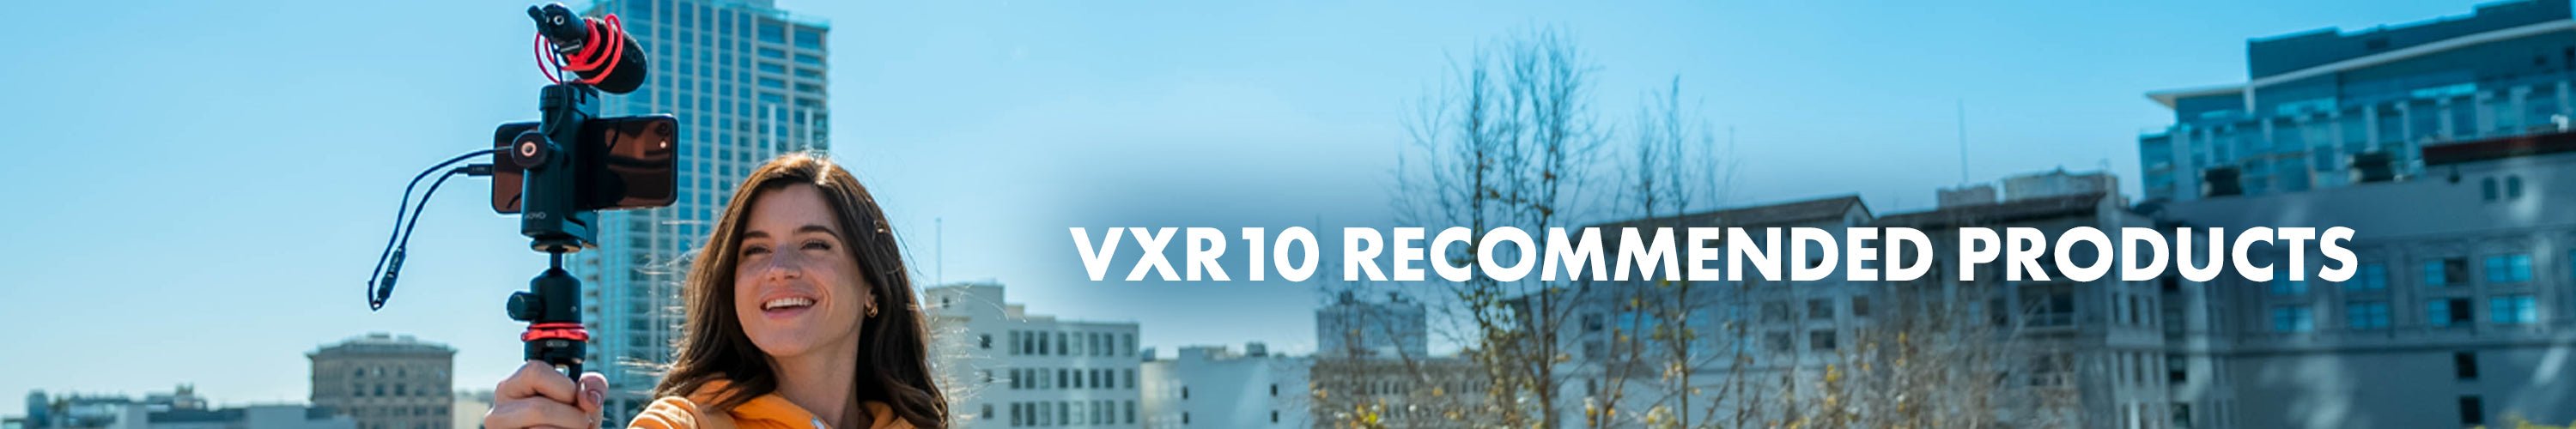 VXR10 Recommended Products - Movo